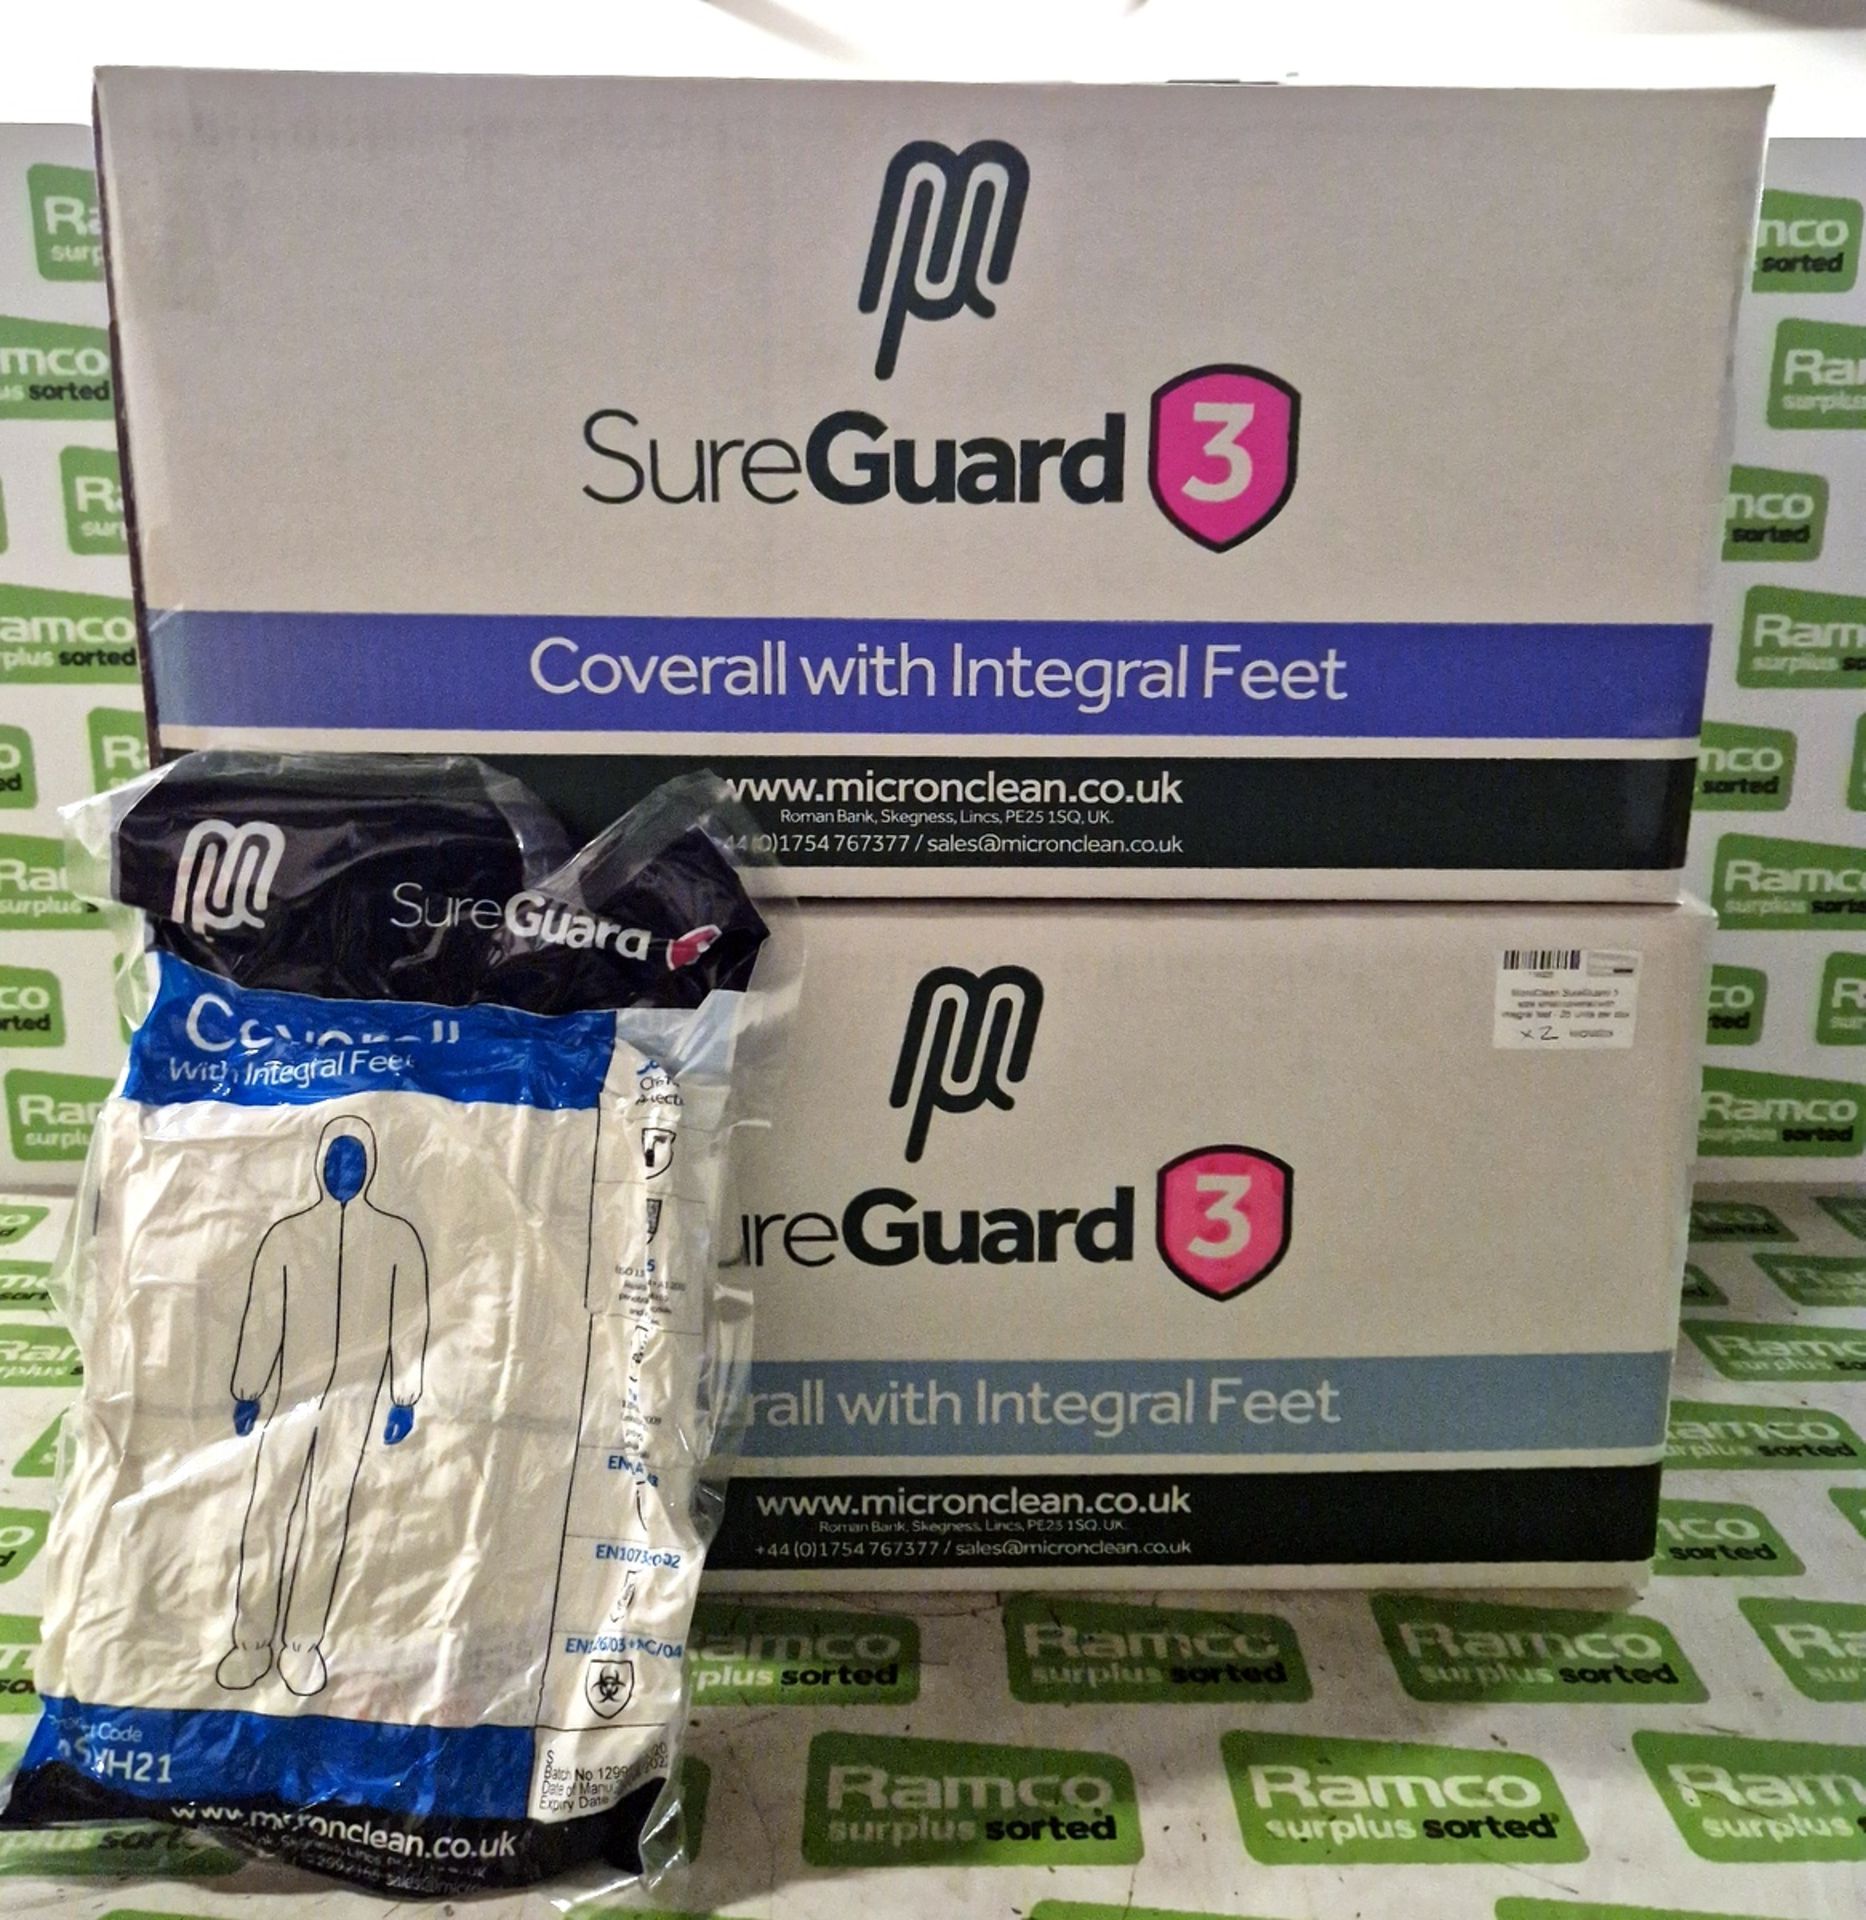 2x boxes of MicroClean SureGuard 3 coveralls with integral feet - size small - 25 units per box